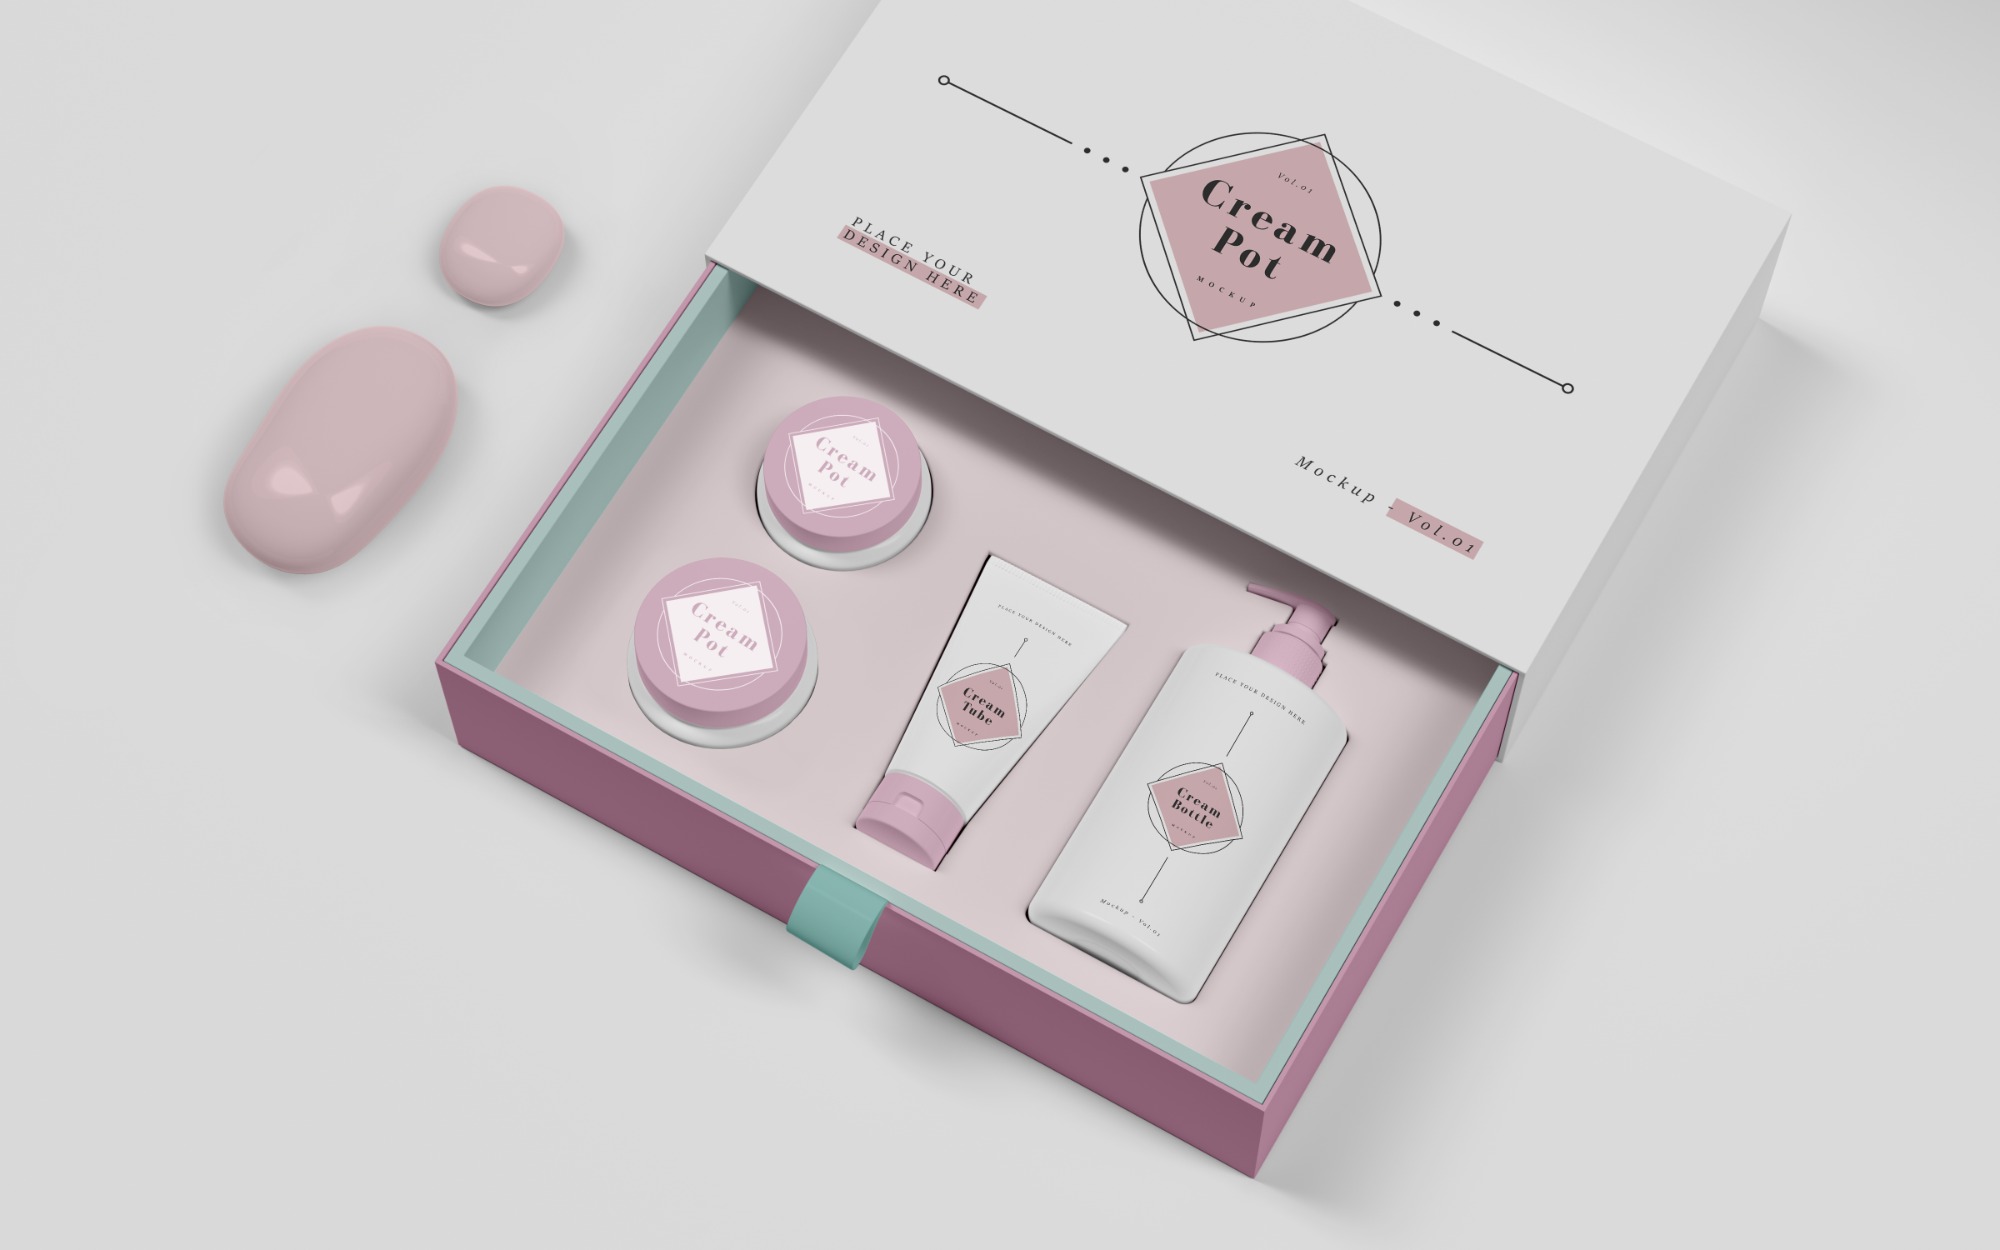 About How to Create Your Beauty Box